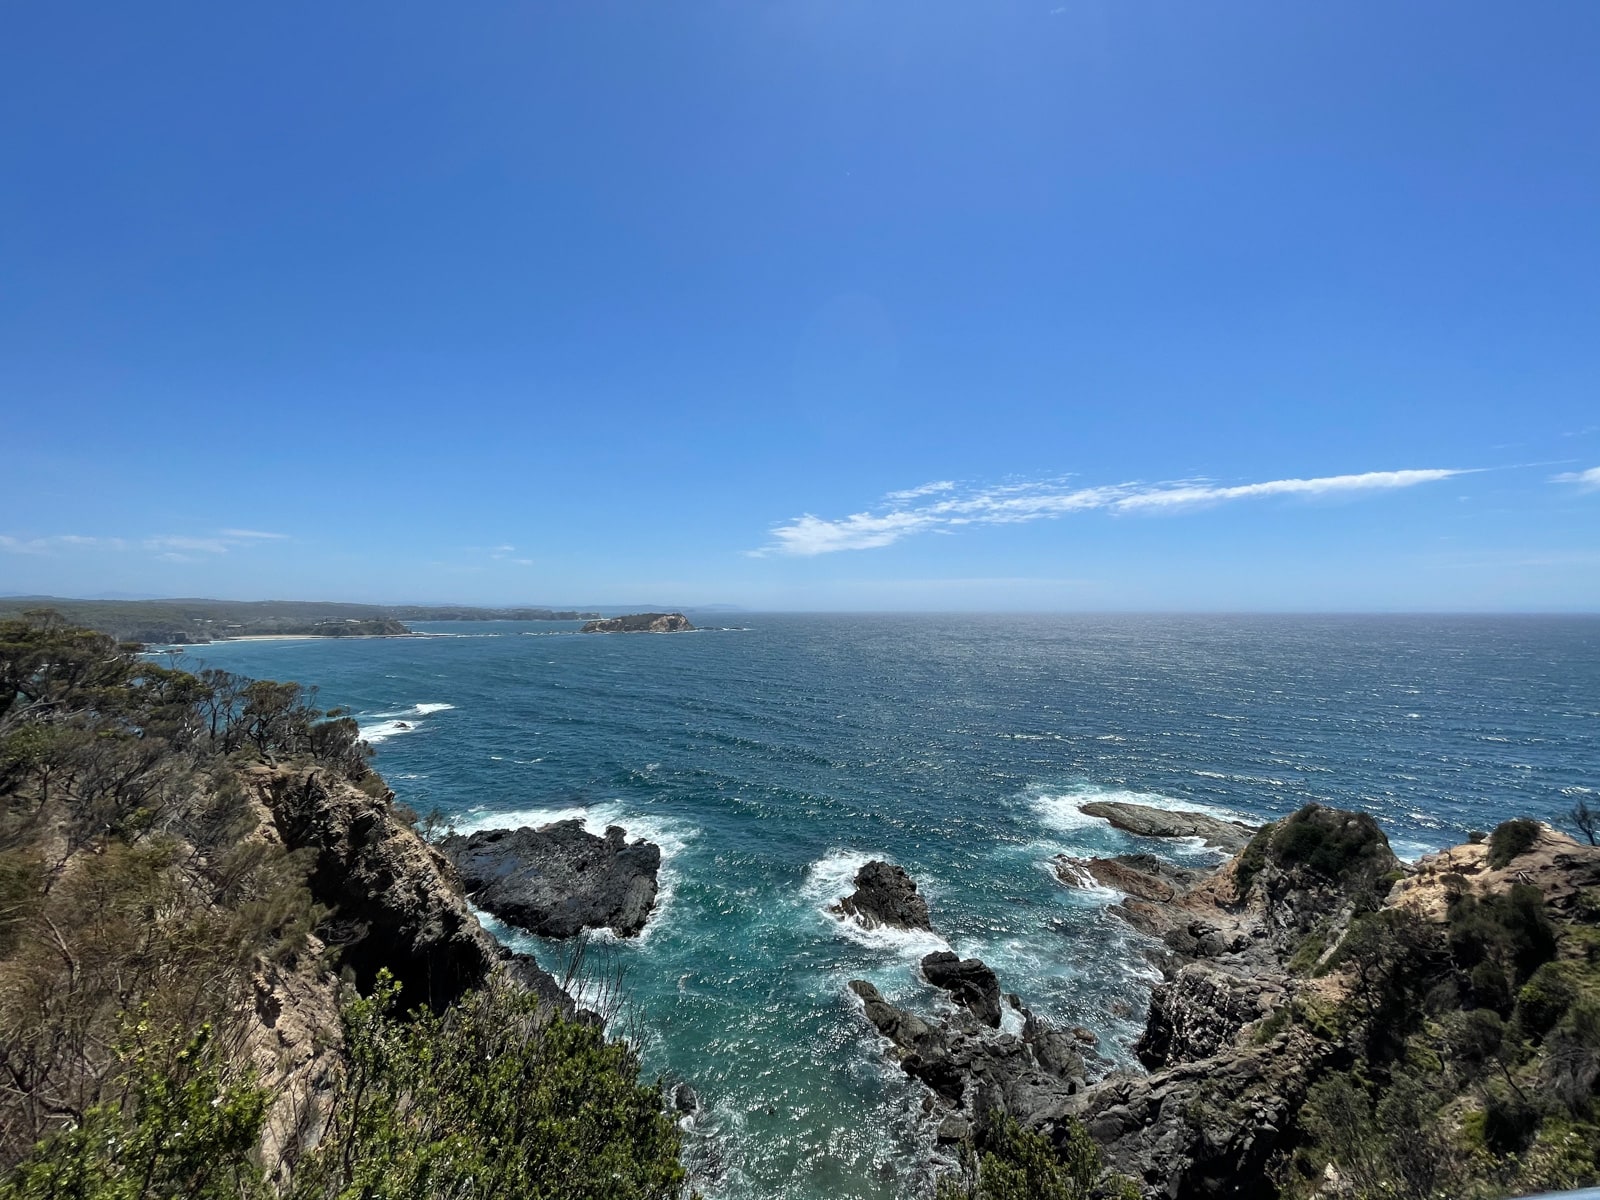 A view of the ocean from a viewing platform, with dark rock formations in the foreground. It is a sunny day with an almost cloudless sky